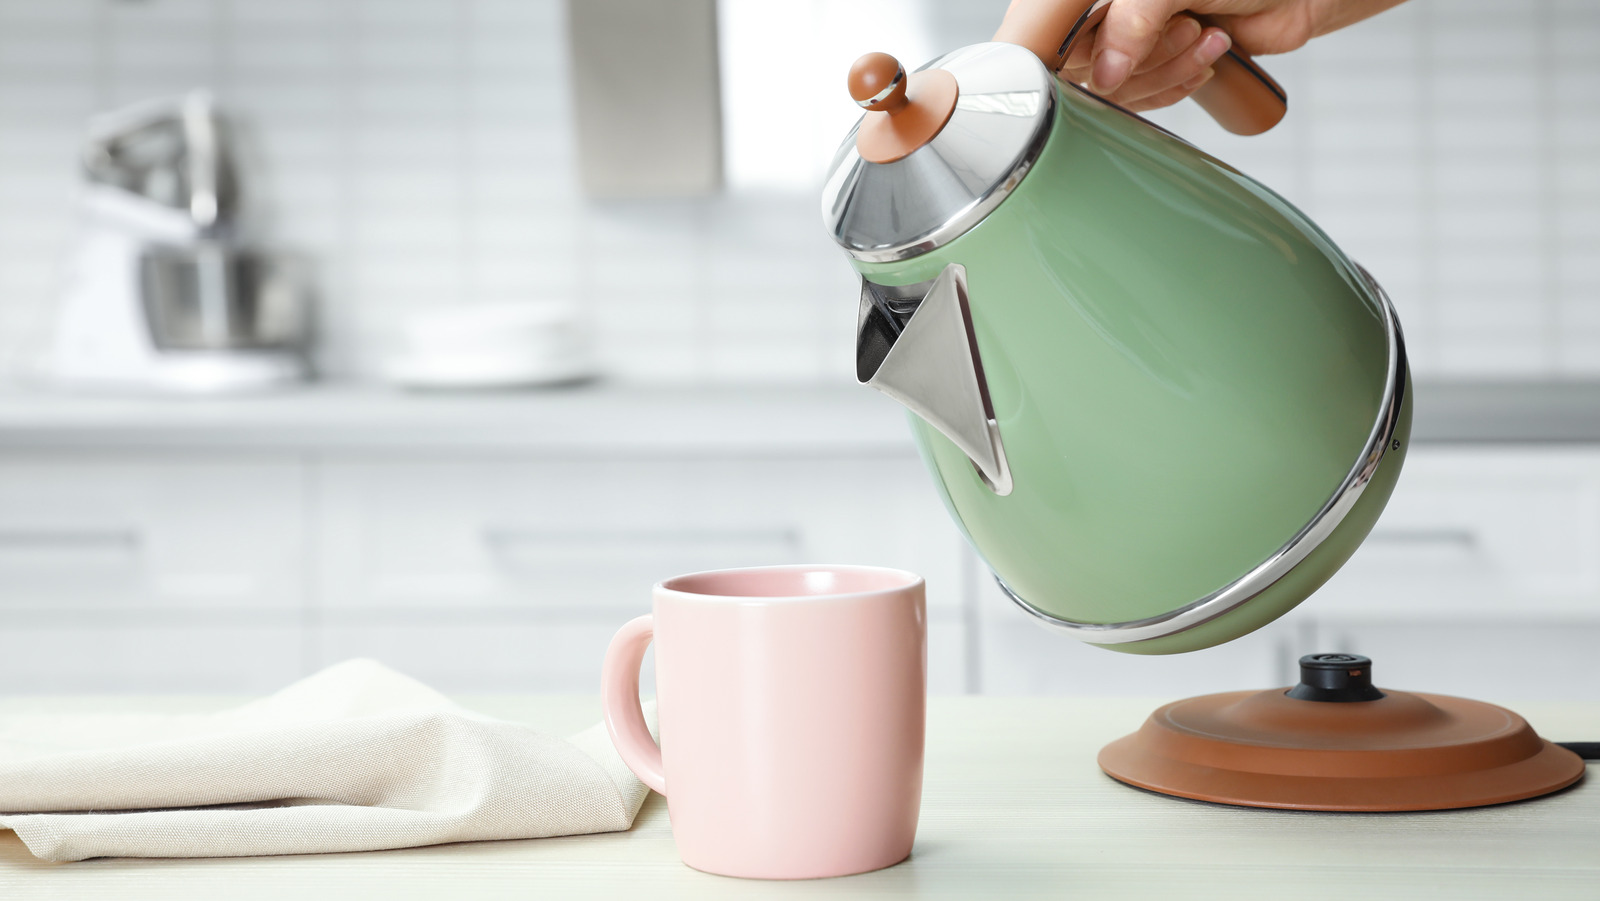 https://www.tastingtable.com/img/gallery/the-absolute-best-uses-for-your-kettle/l-intro-1665065984.jpg